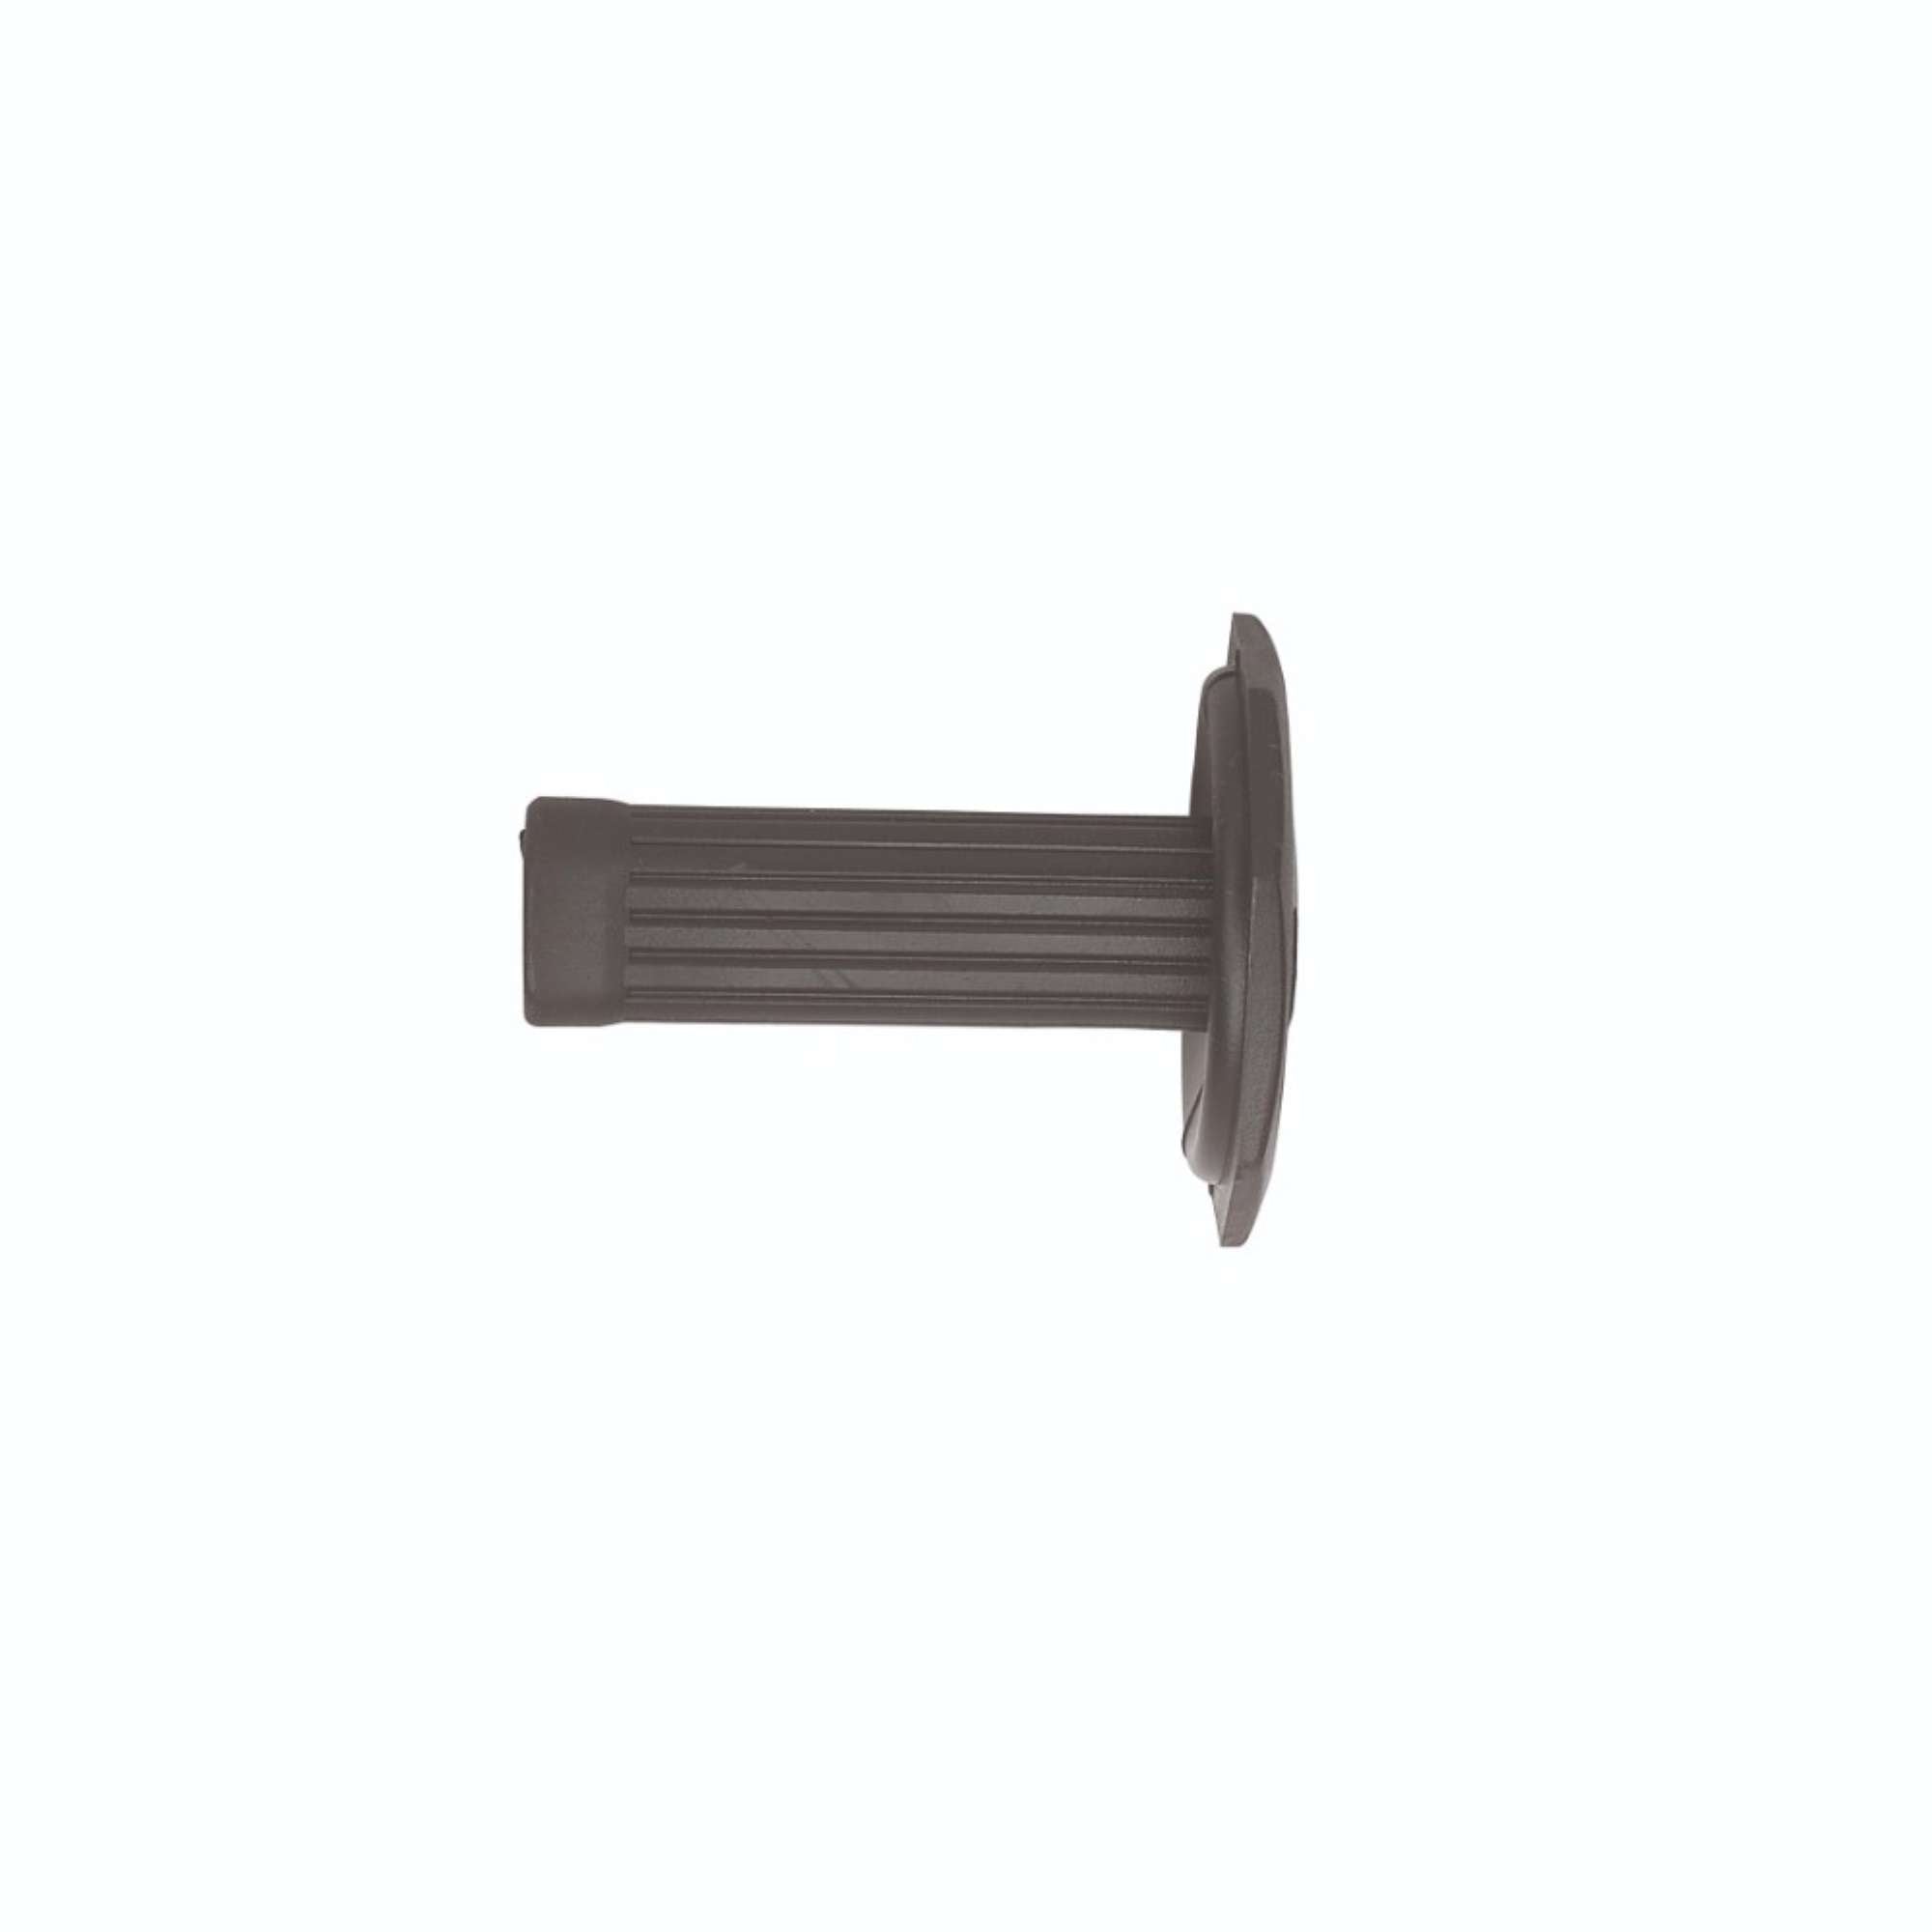 Replacement Handguard for Chisels 360 A - Usag 361 R U03610005